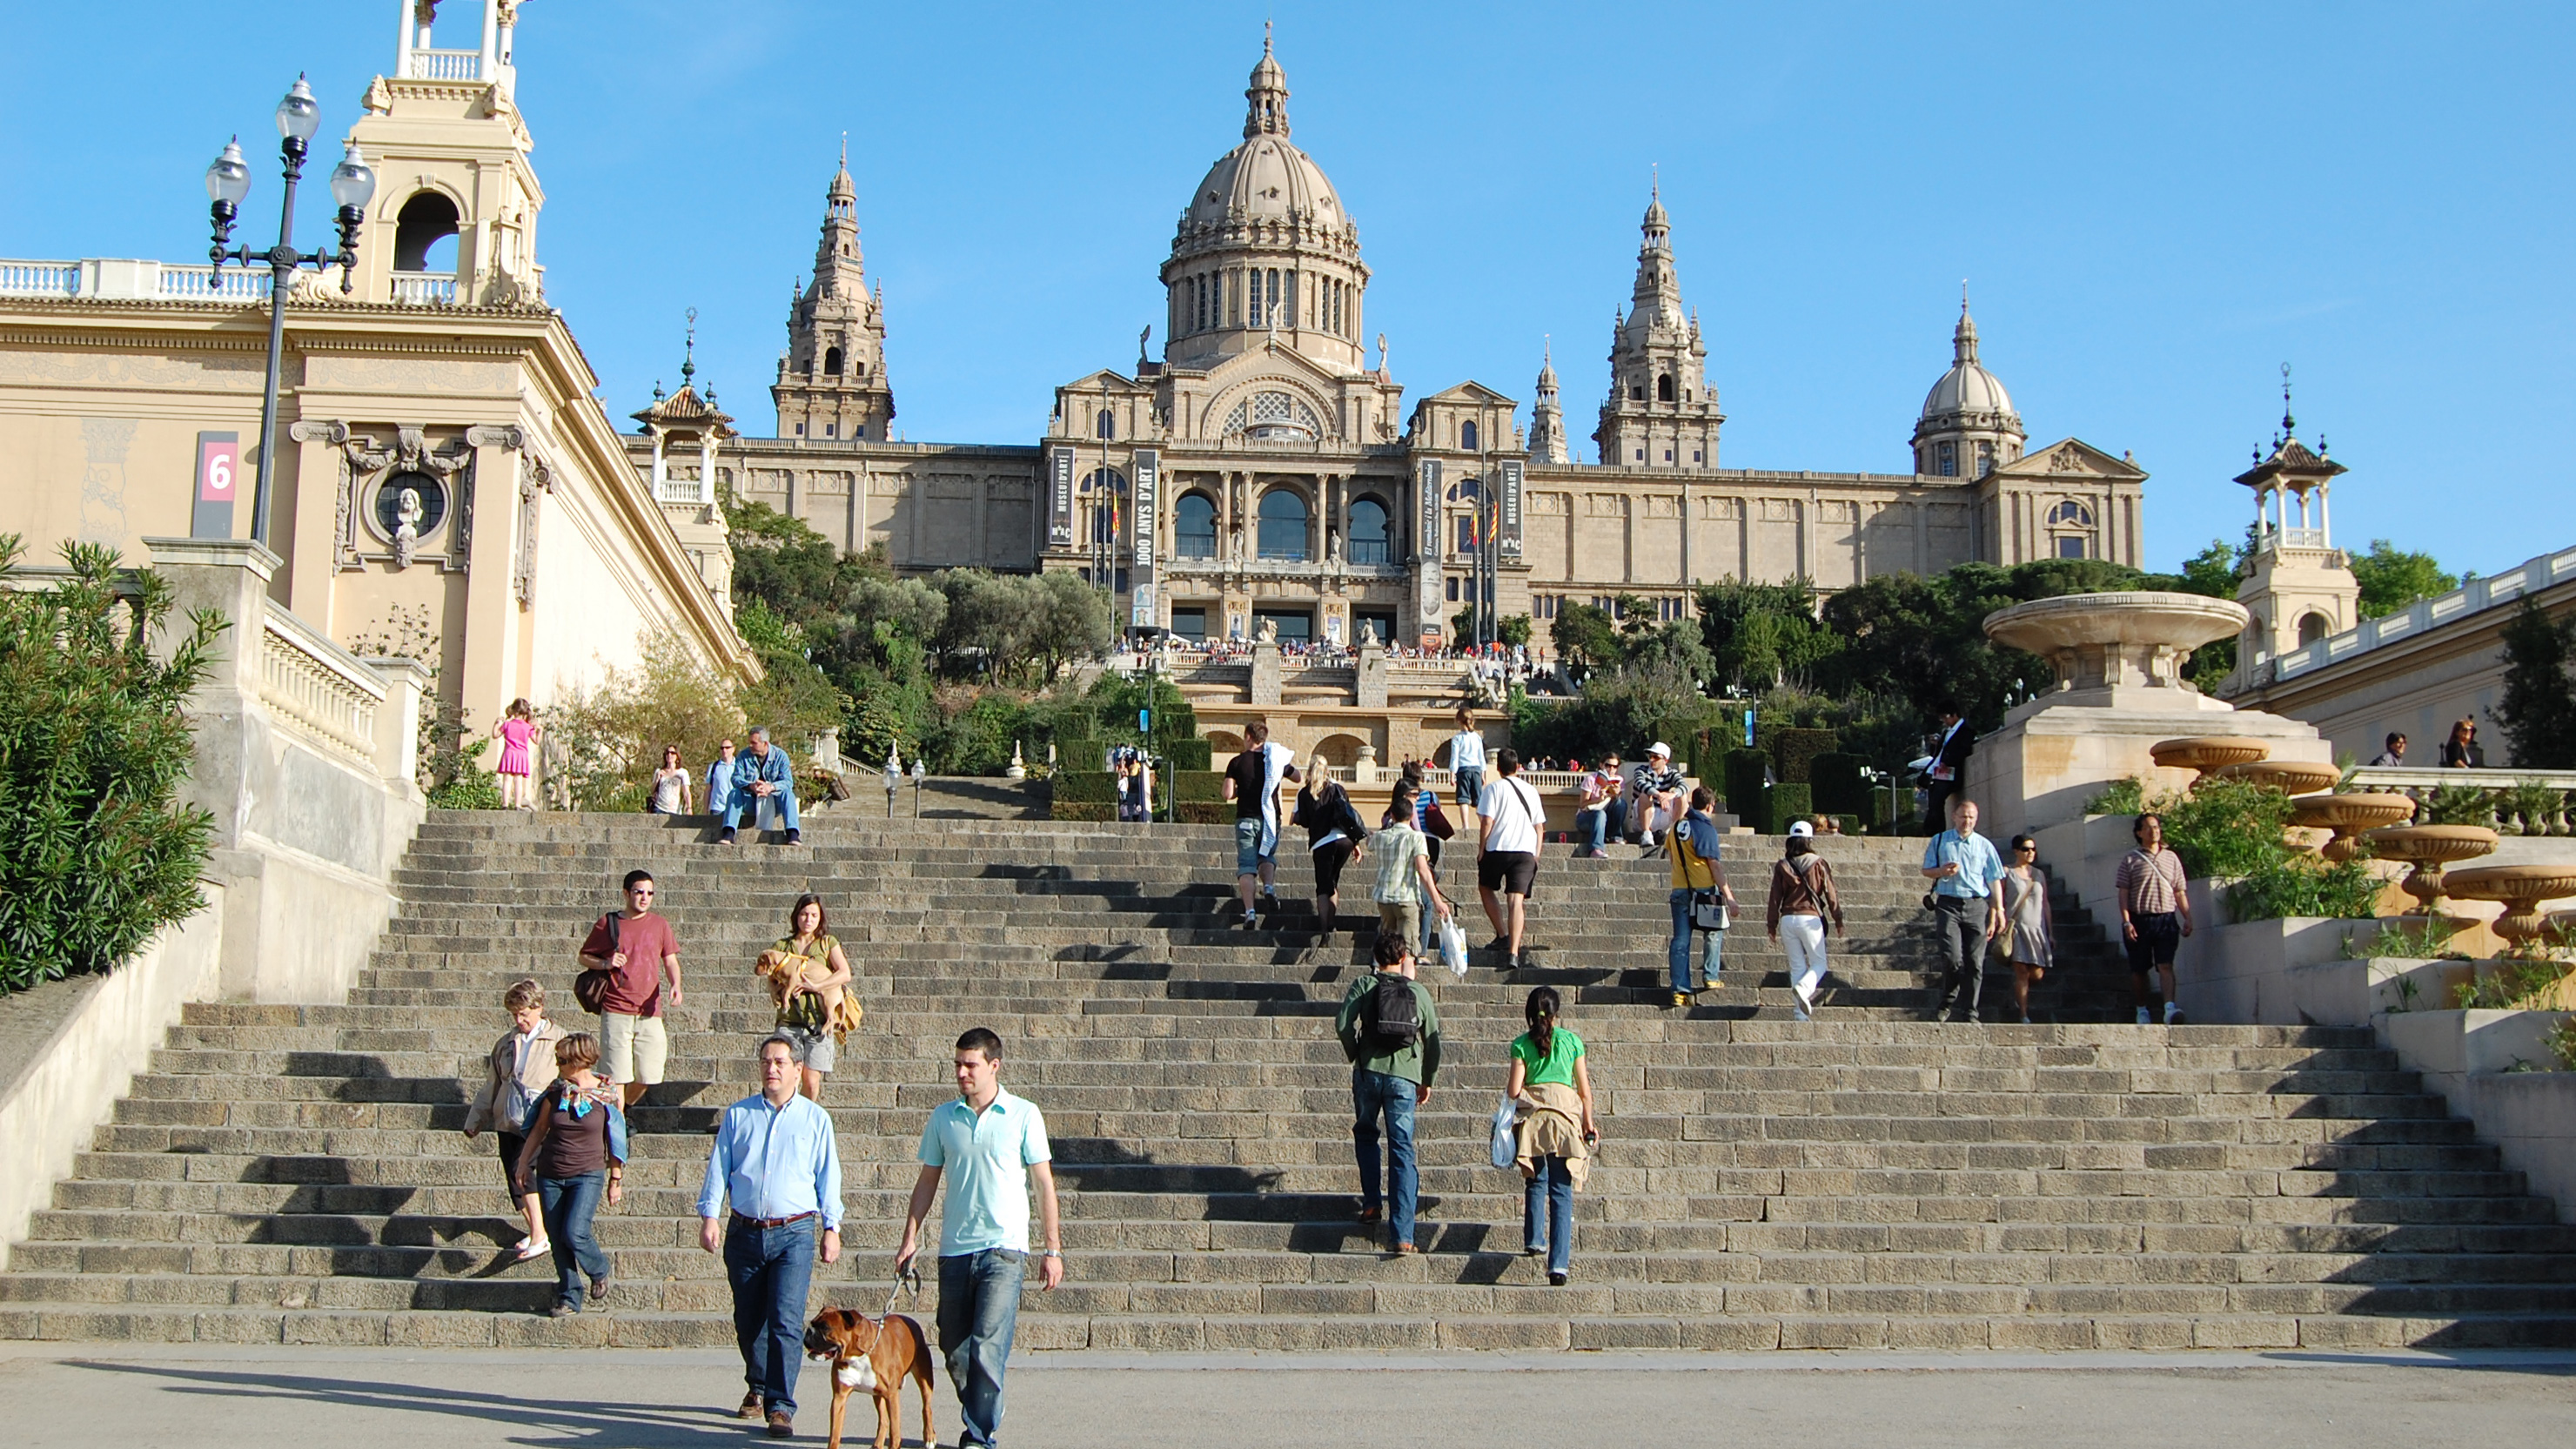 Rodeado temerario Regreso Barcelona Itinerary: Where to Go in 1 to 7 Days by Rick Steves